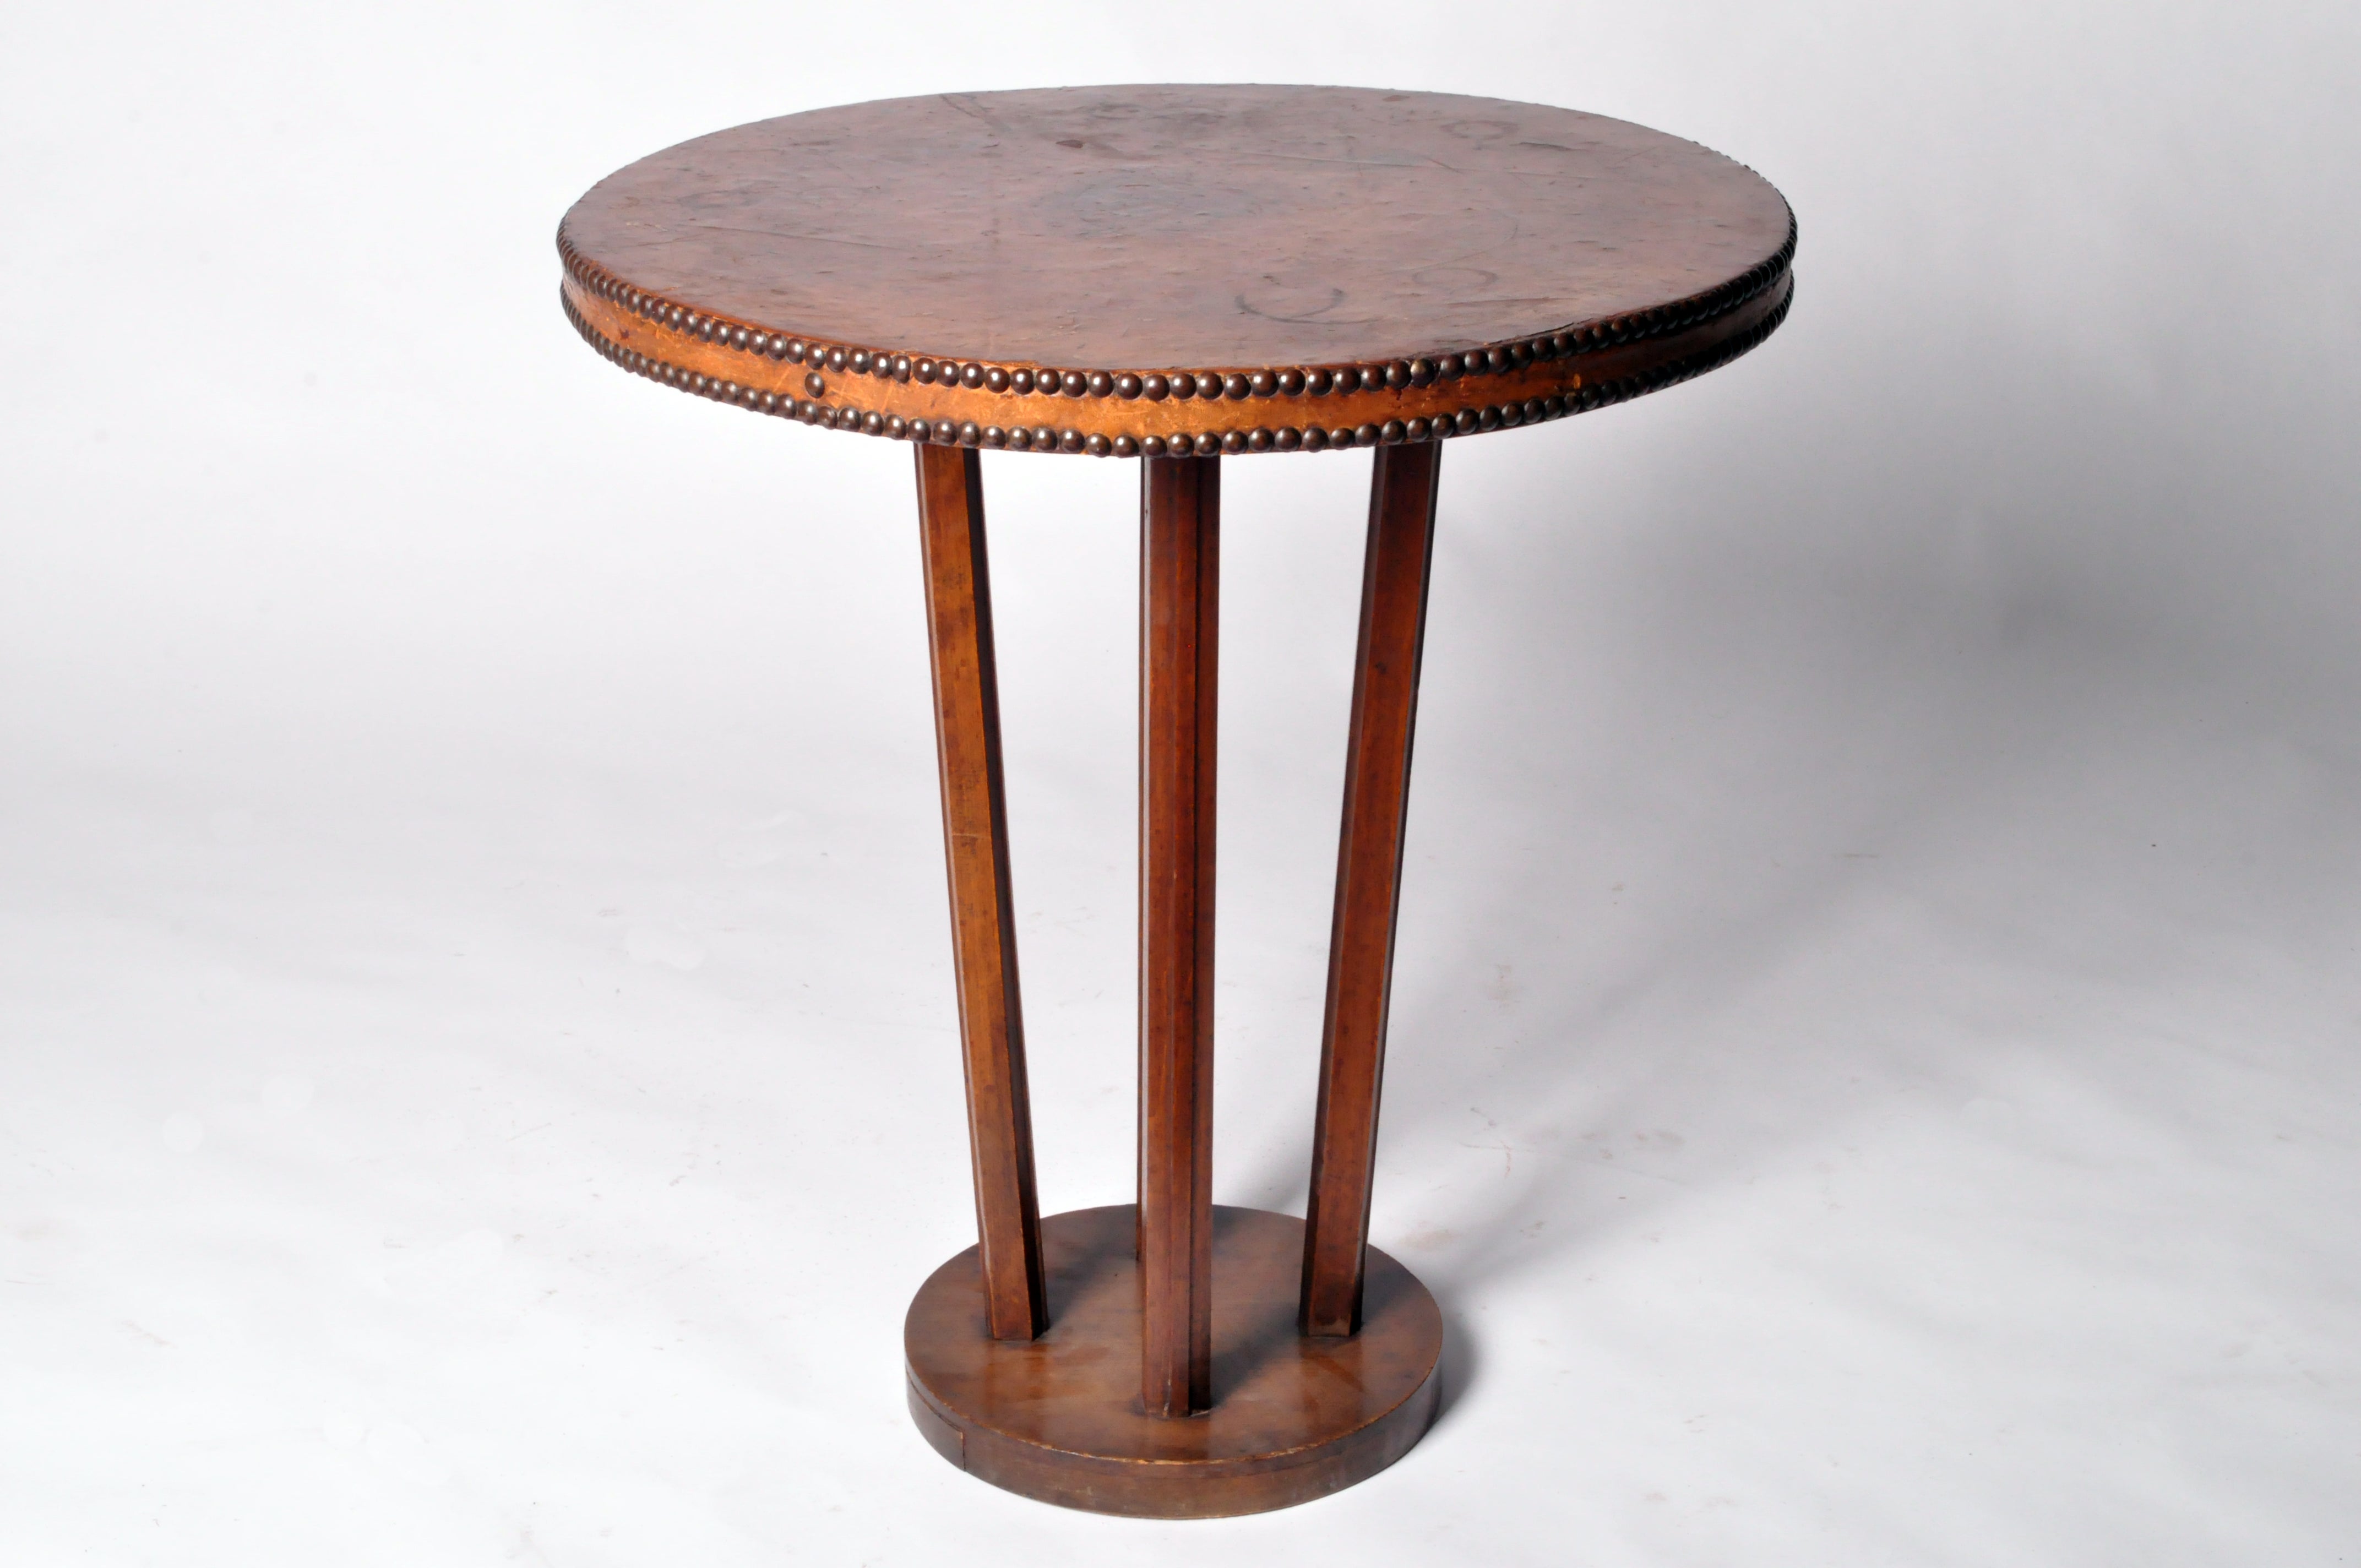 A Round Table with Leather Top